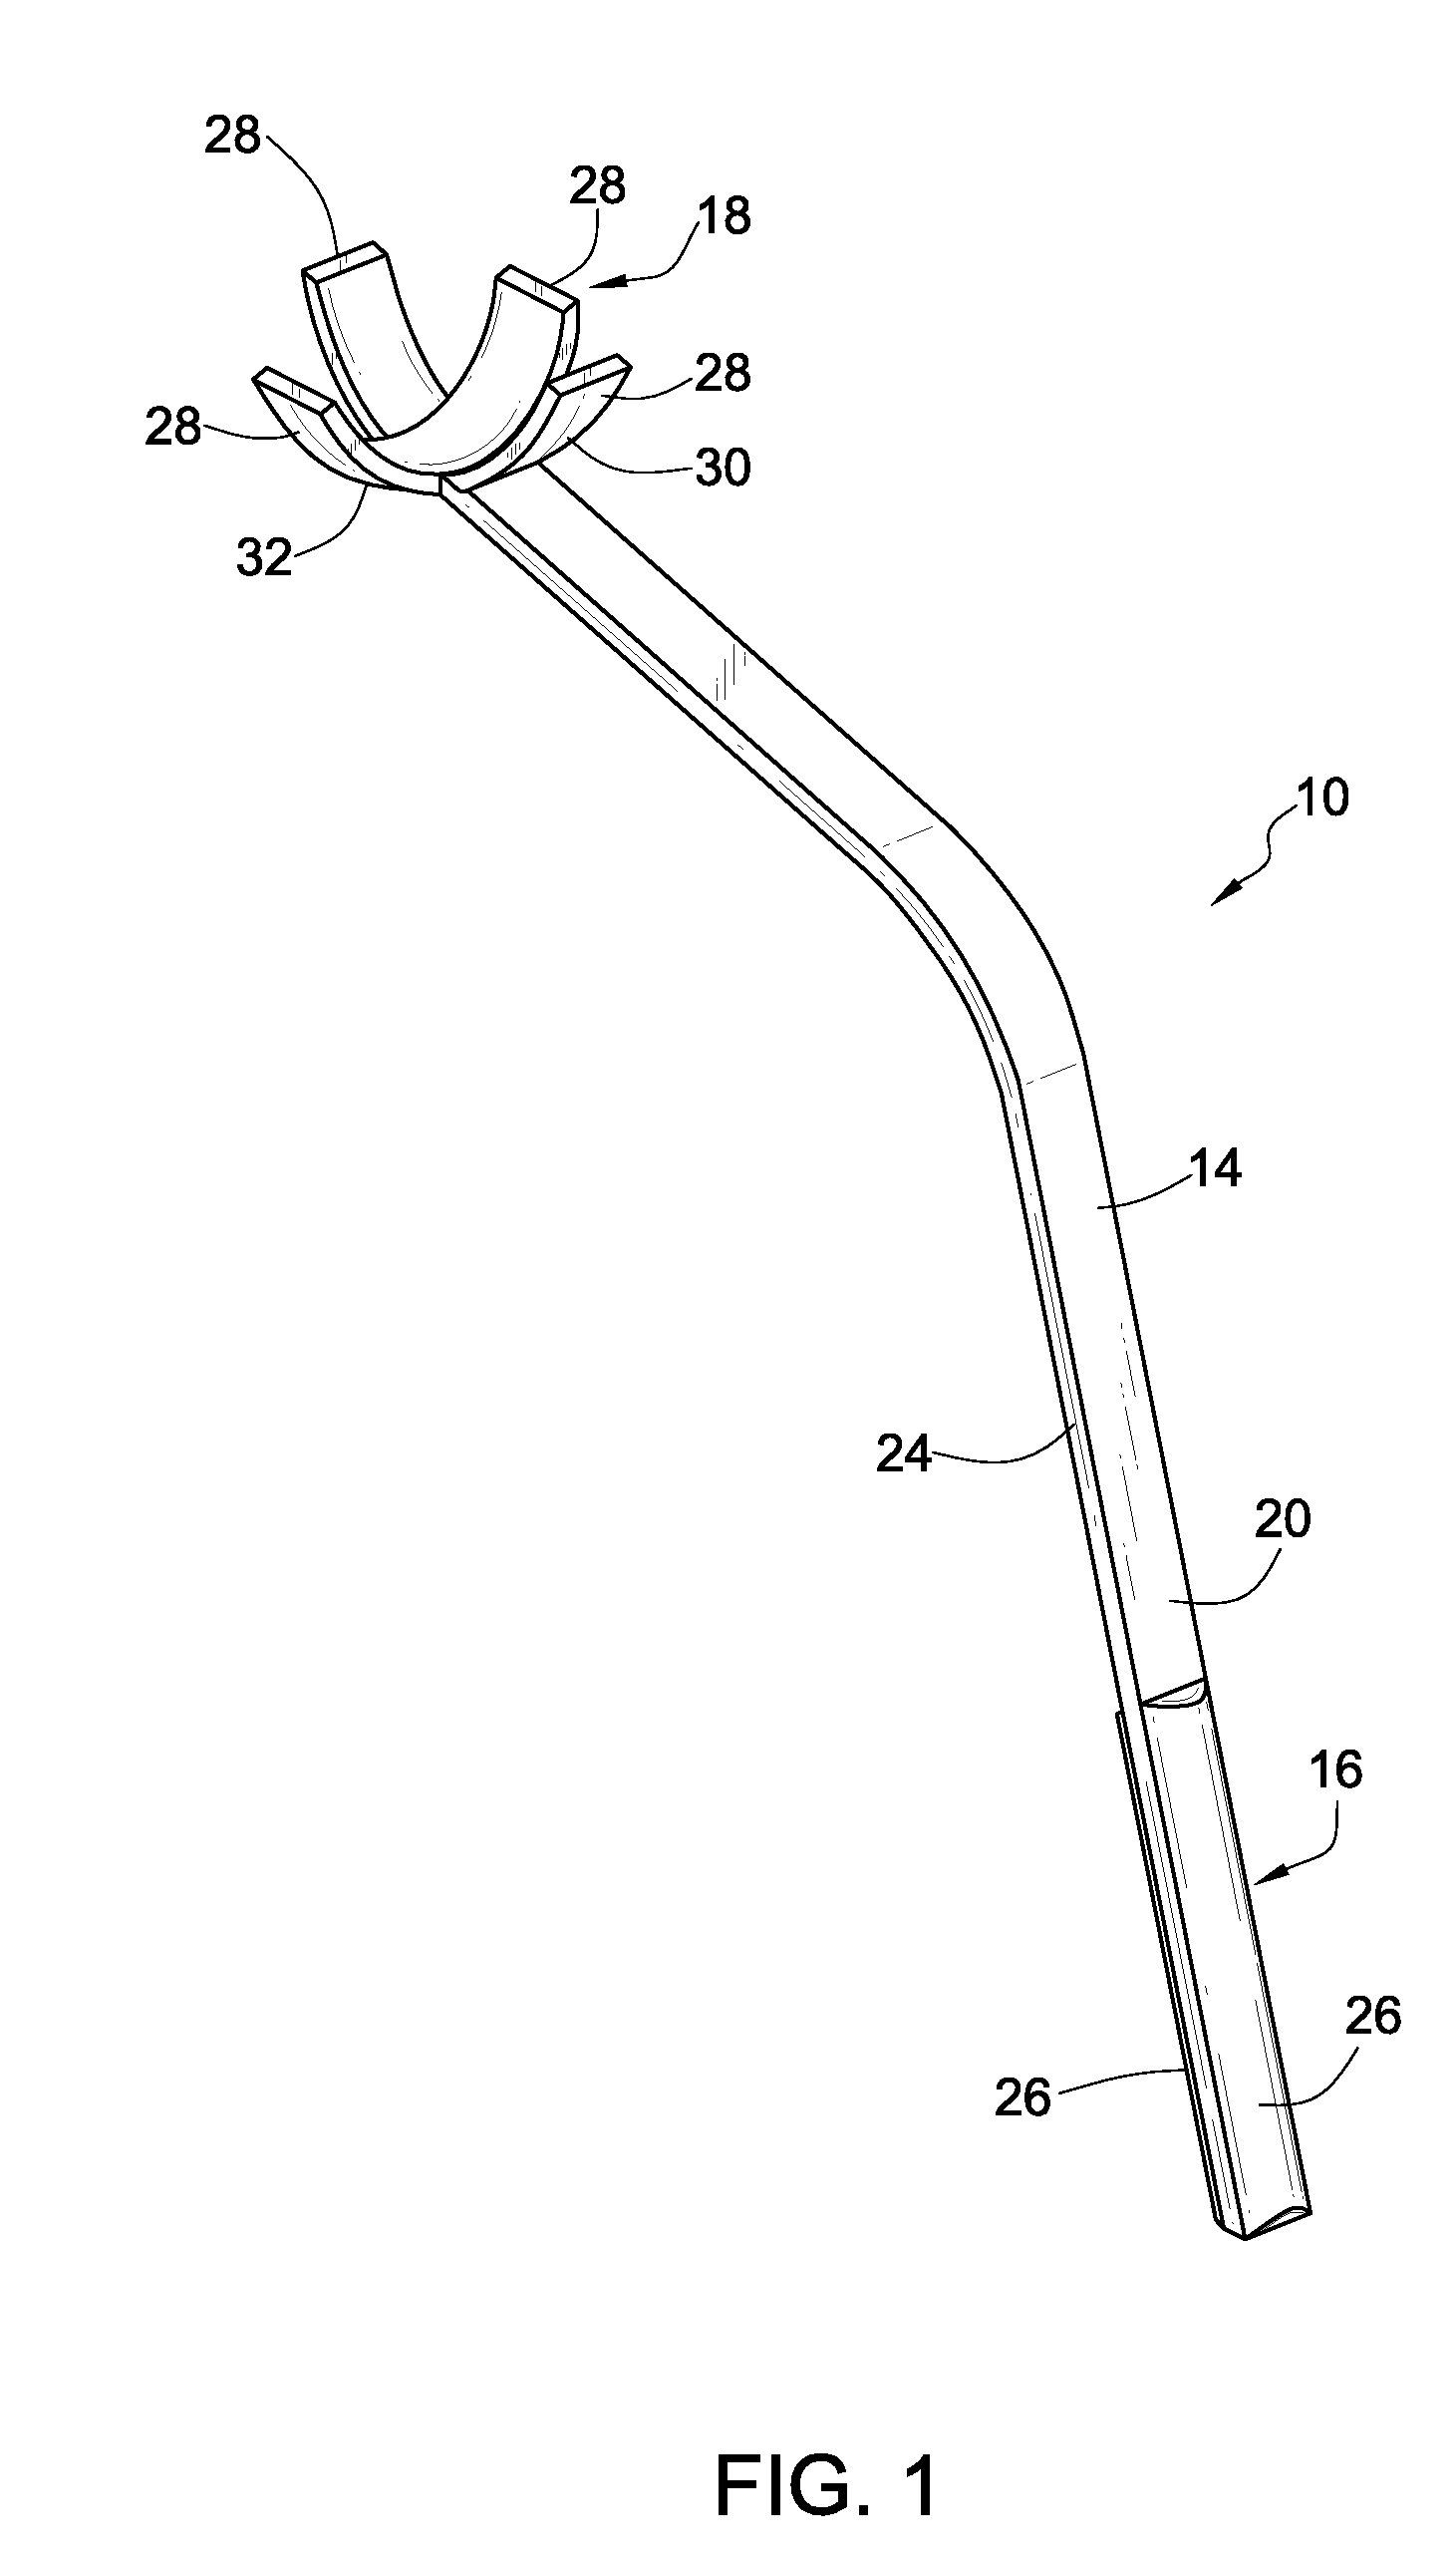 Ball throwing device and display package therefor